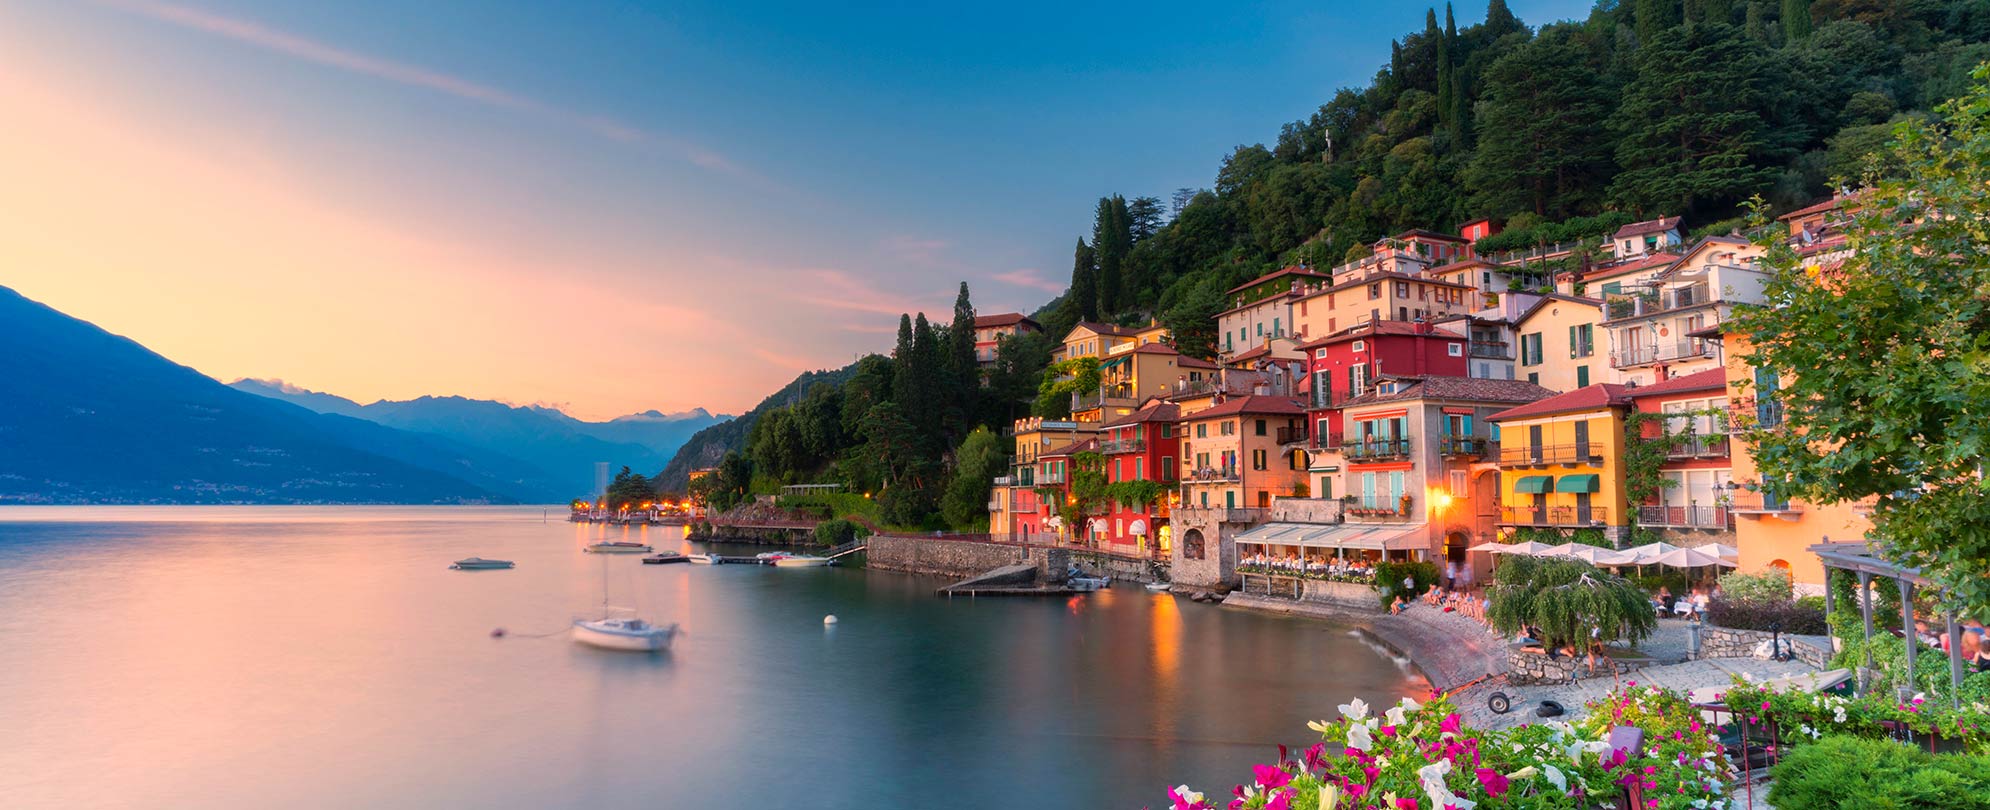 Colorful buildings on a mountainside overlooking Lake Como in Italy with bright skies and mountains in the distance.